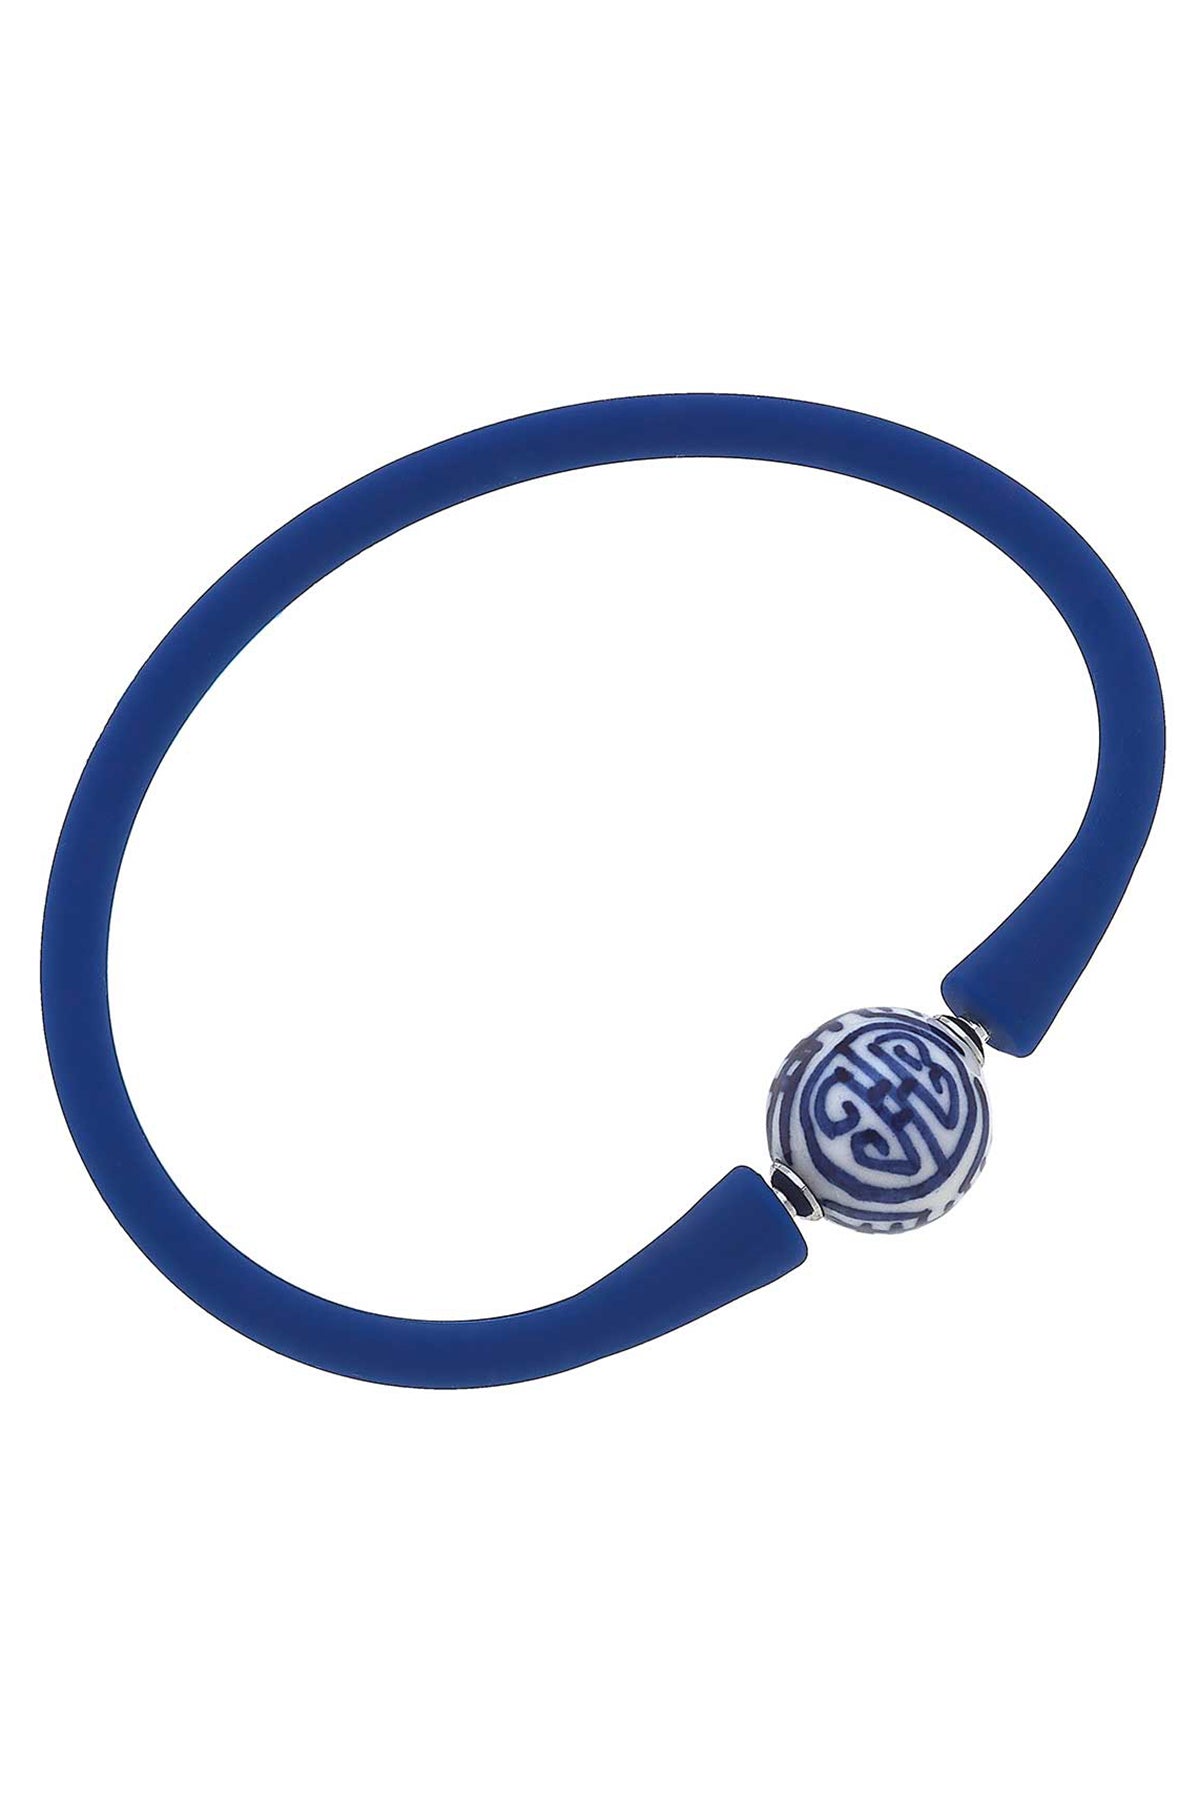 Bali Chinoiserie Bead Silicone Bracelet in Royal Blue